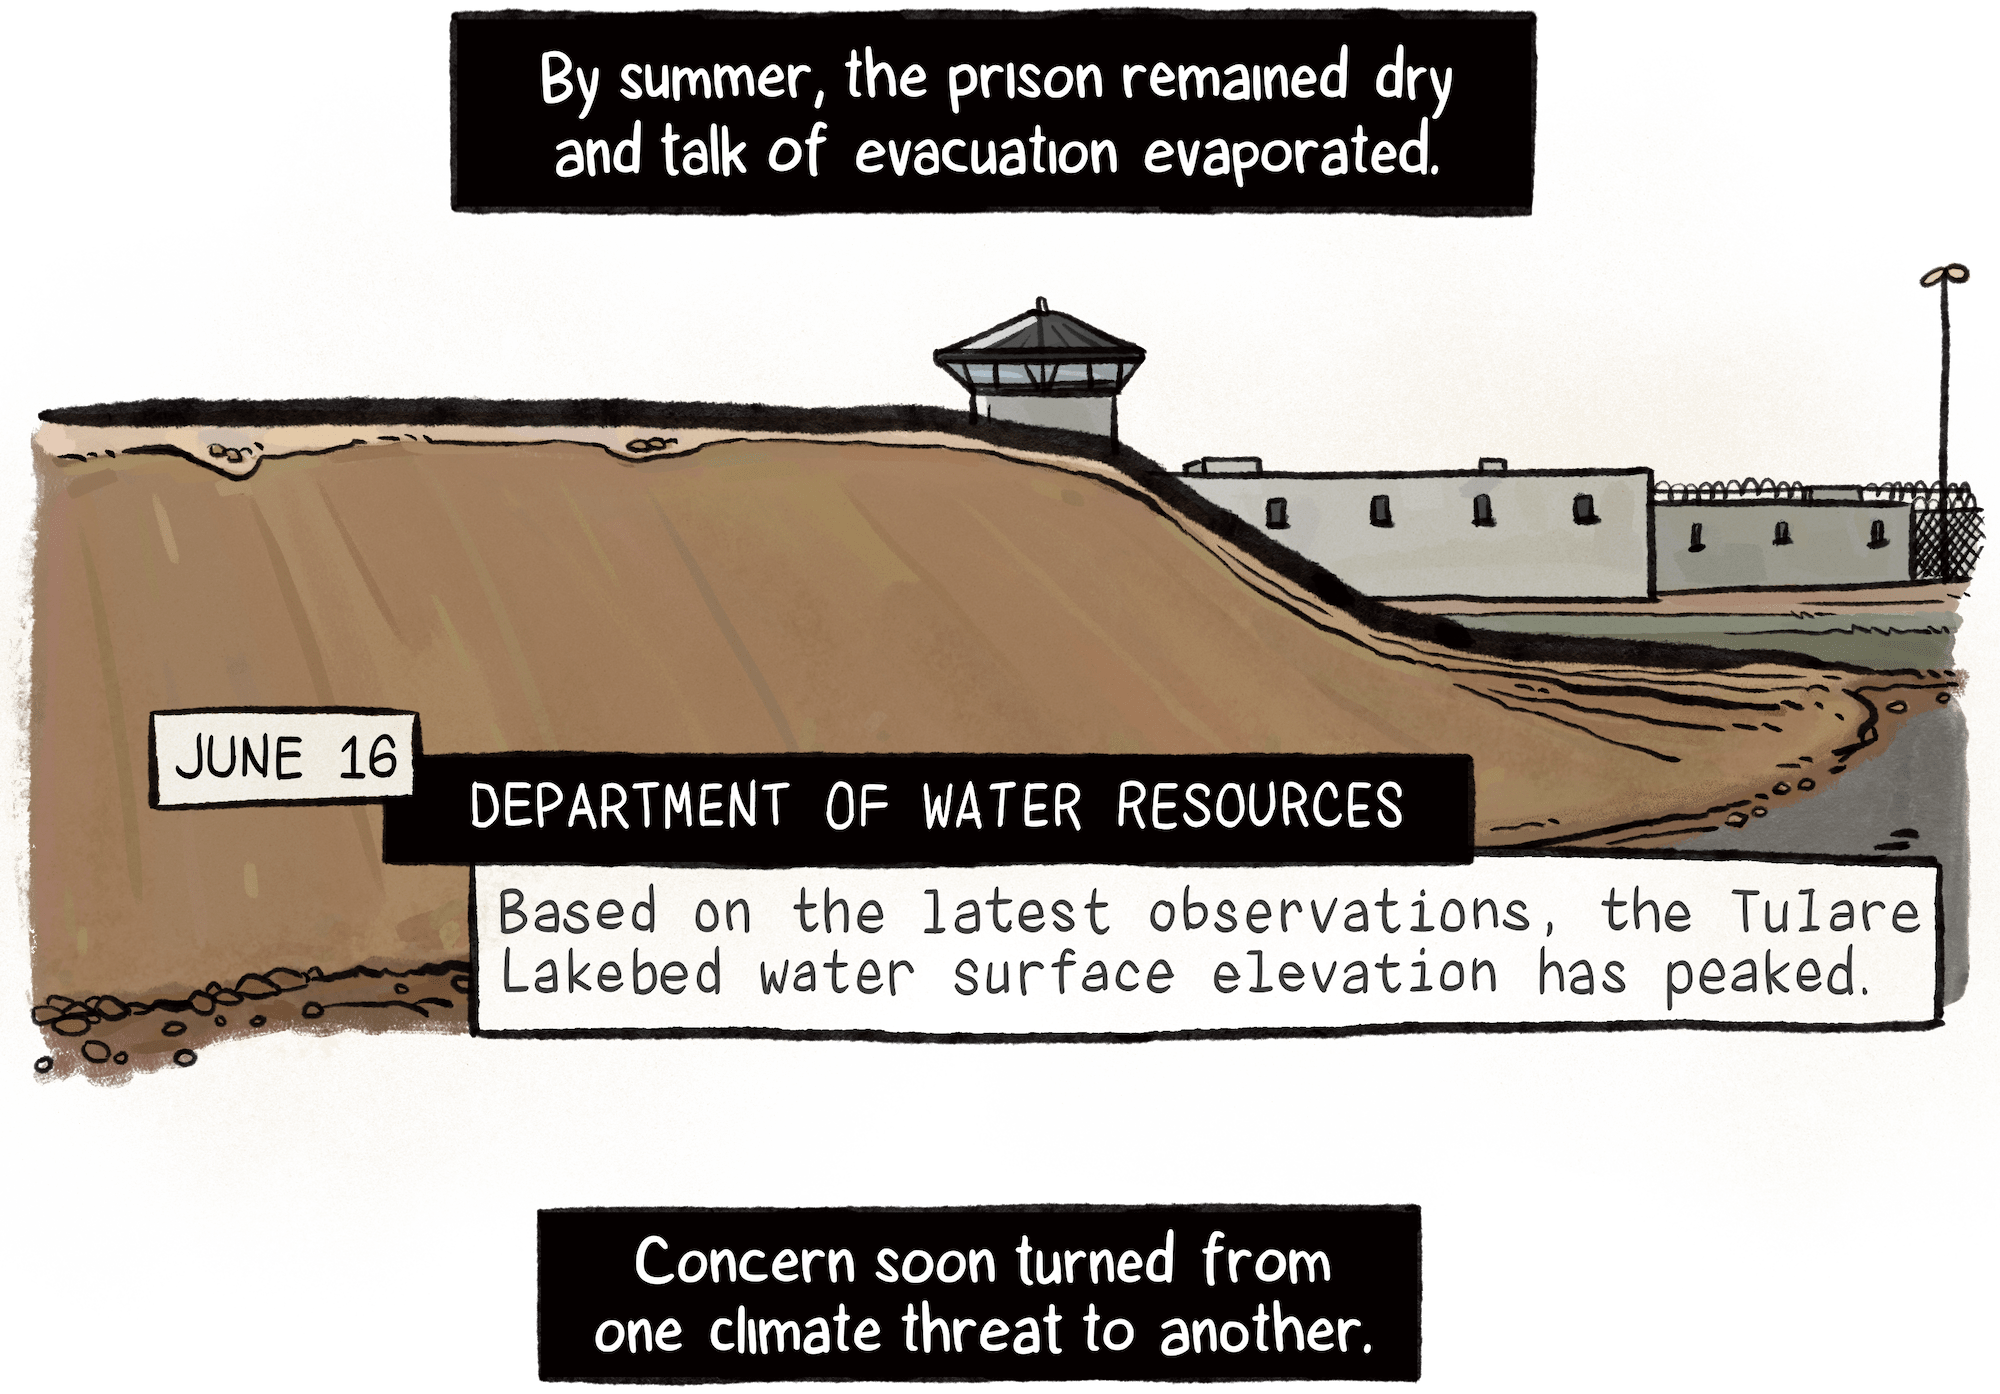 By mid-June, the prison remained dry. Talk of evacuation evaporated. Water levels had peaked, according to the Department of Water Resources. Next to Corcoran, a high mound of shoreline sits above the water.